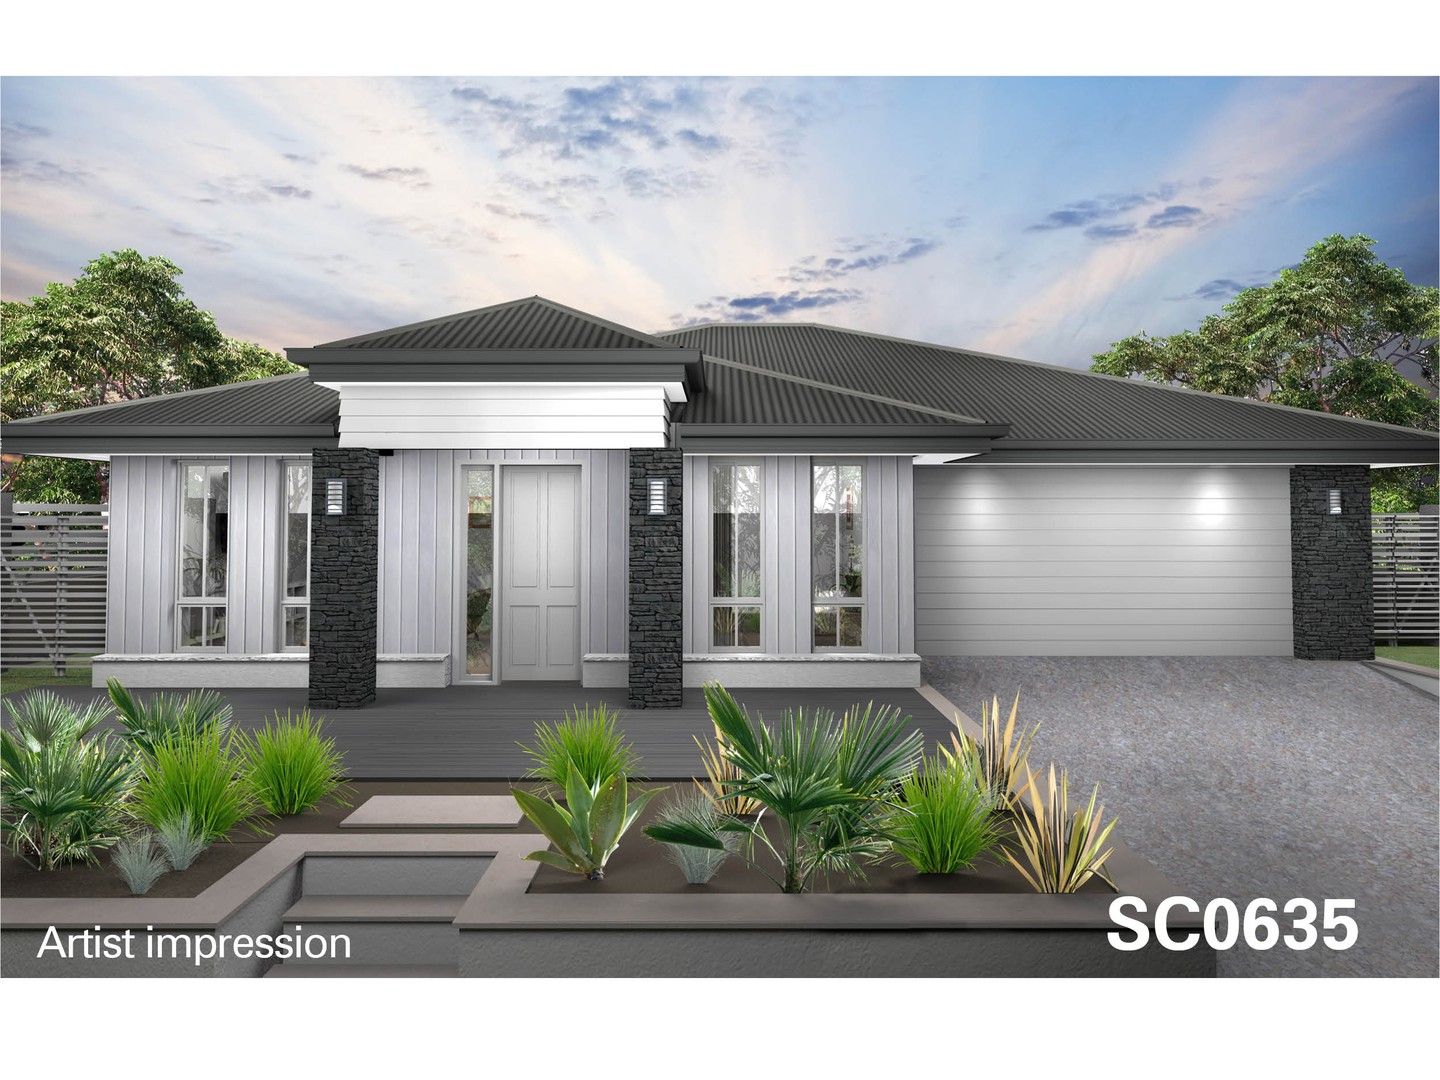 4 bedrooms New House & Land in Lot 5/195 Truro St URANGAN QLD, 4655